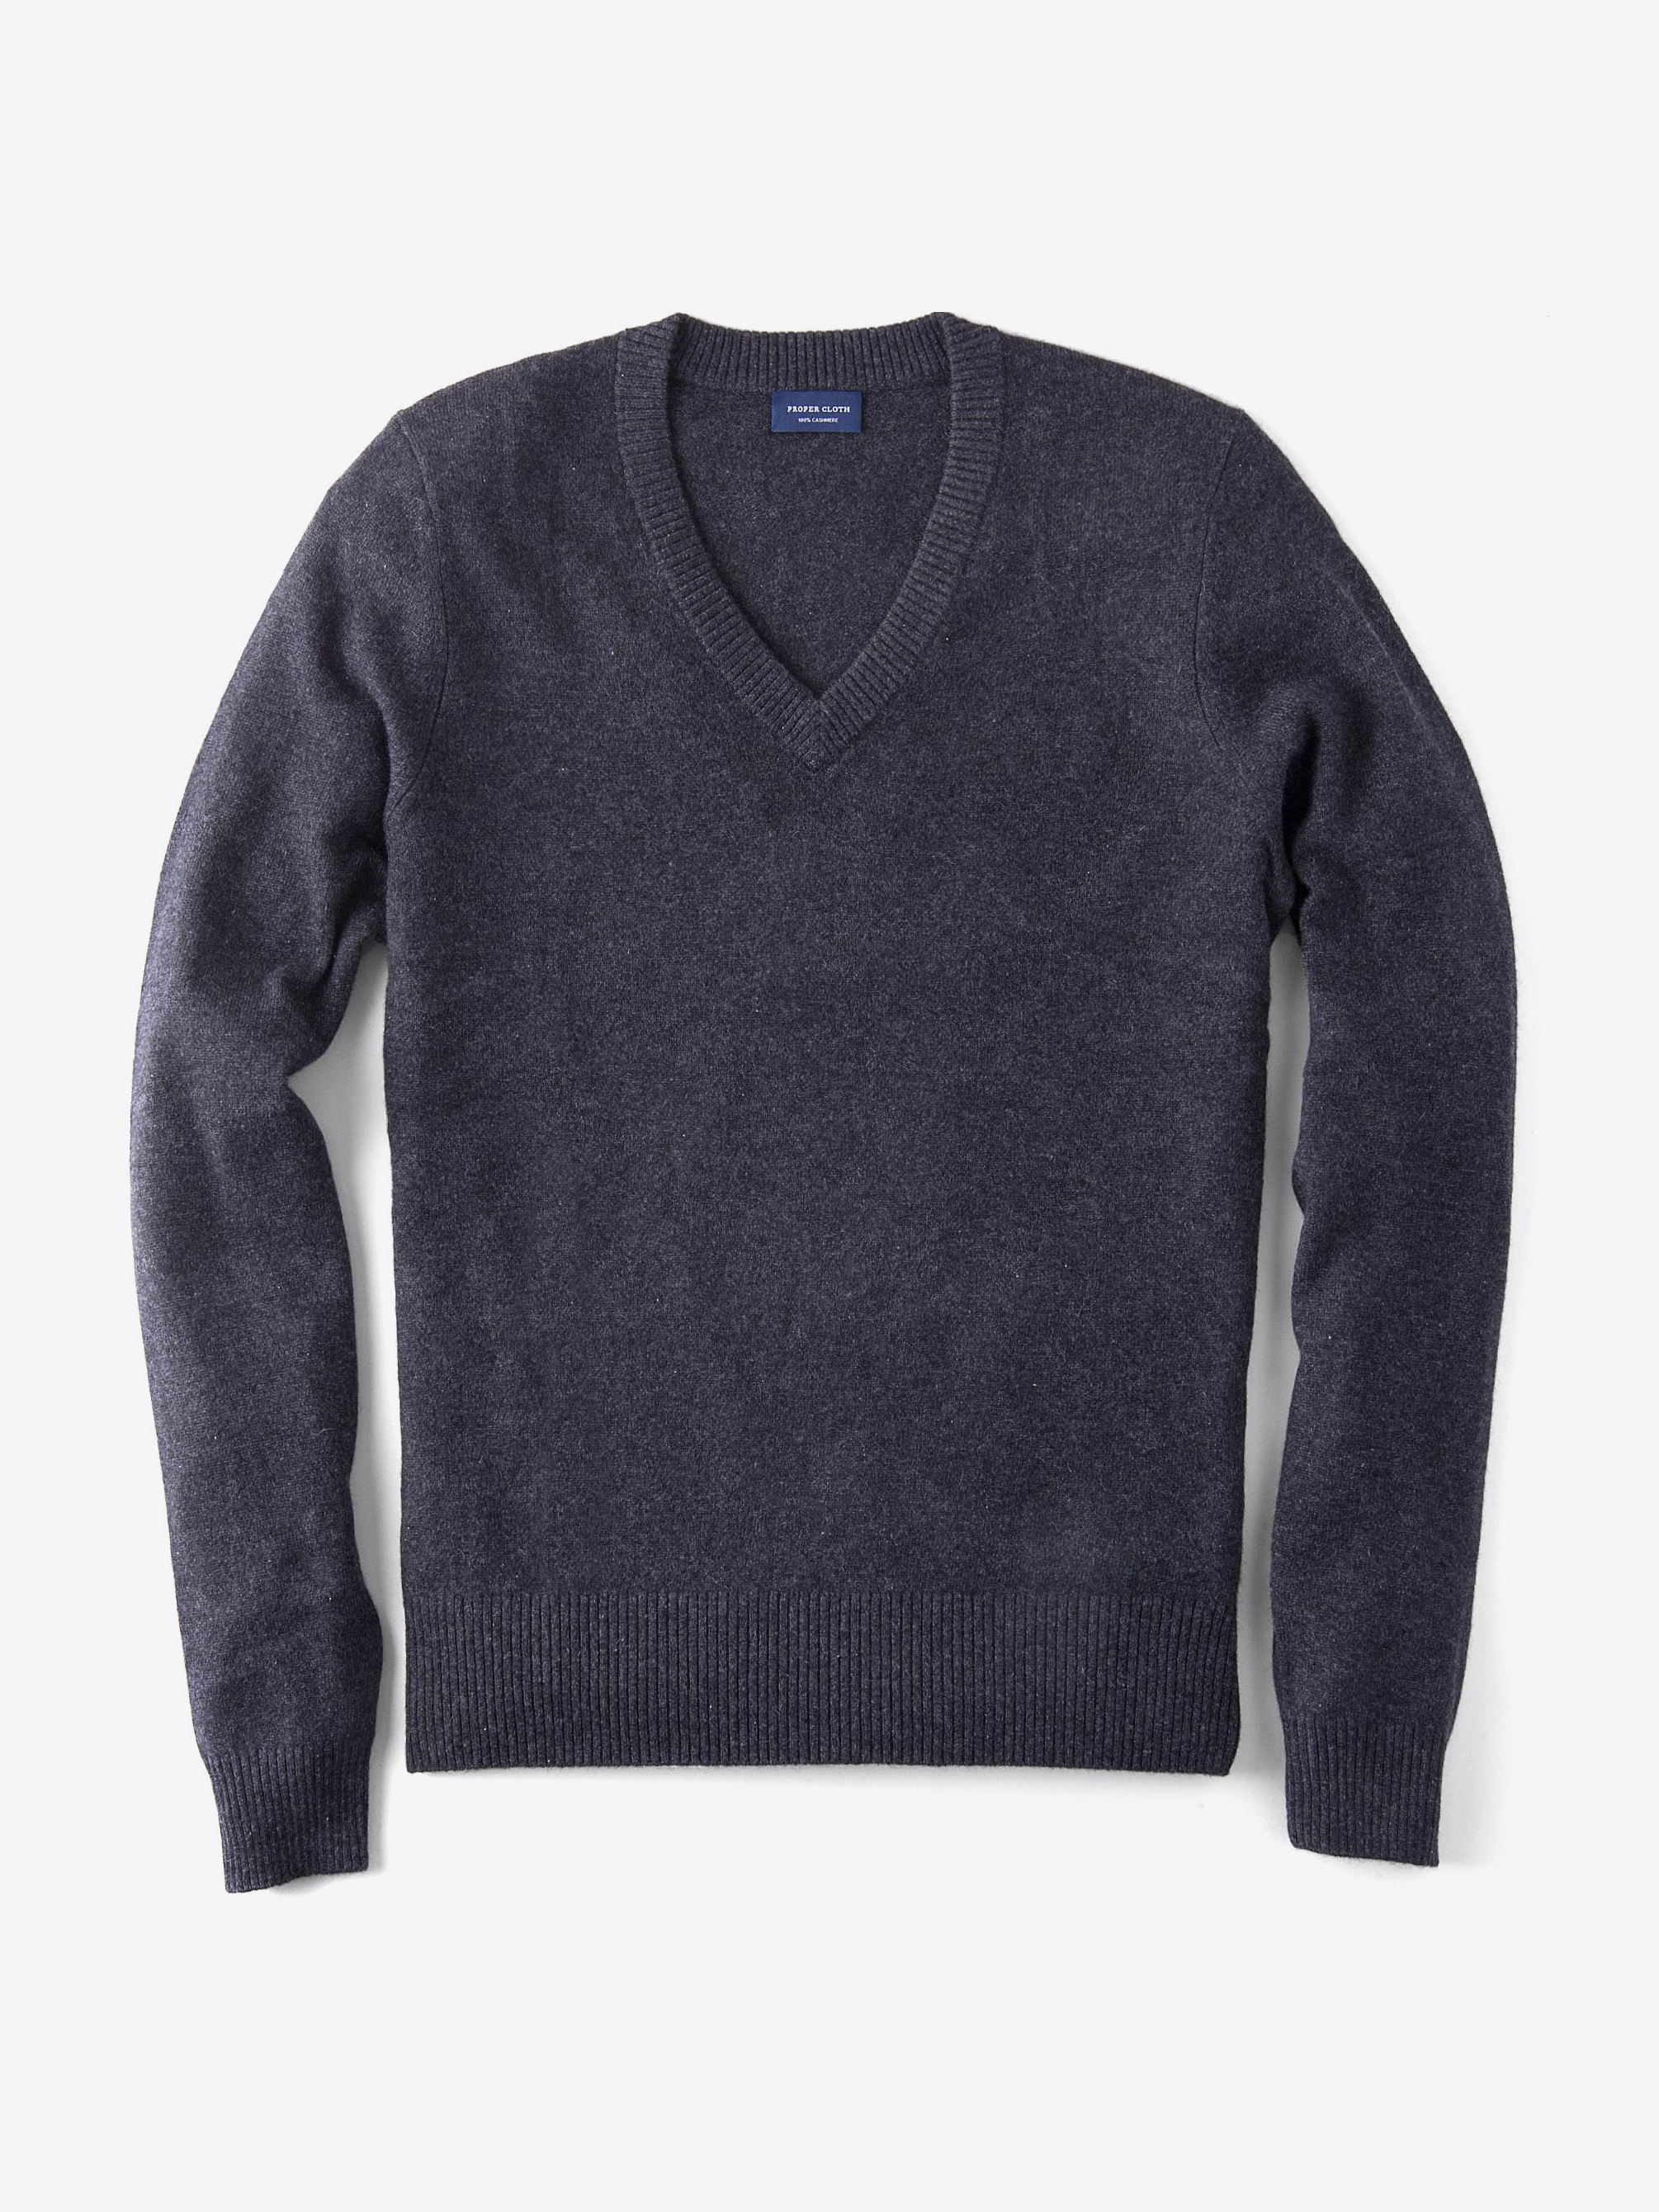 Zoom Image of Charcoal Cashmere V-Neck Sweater